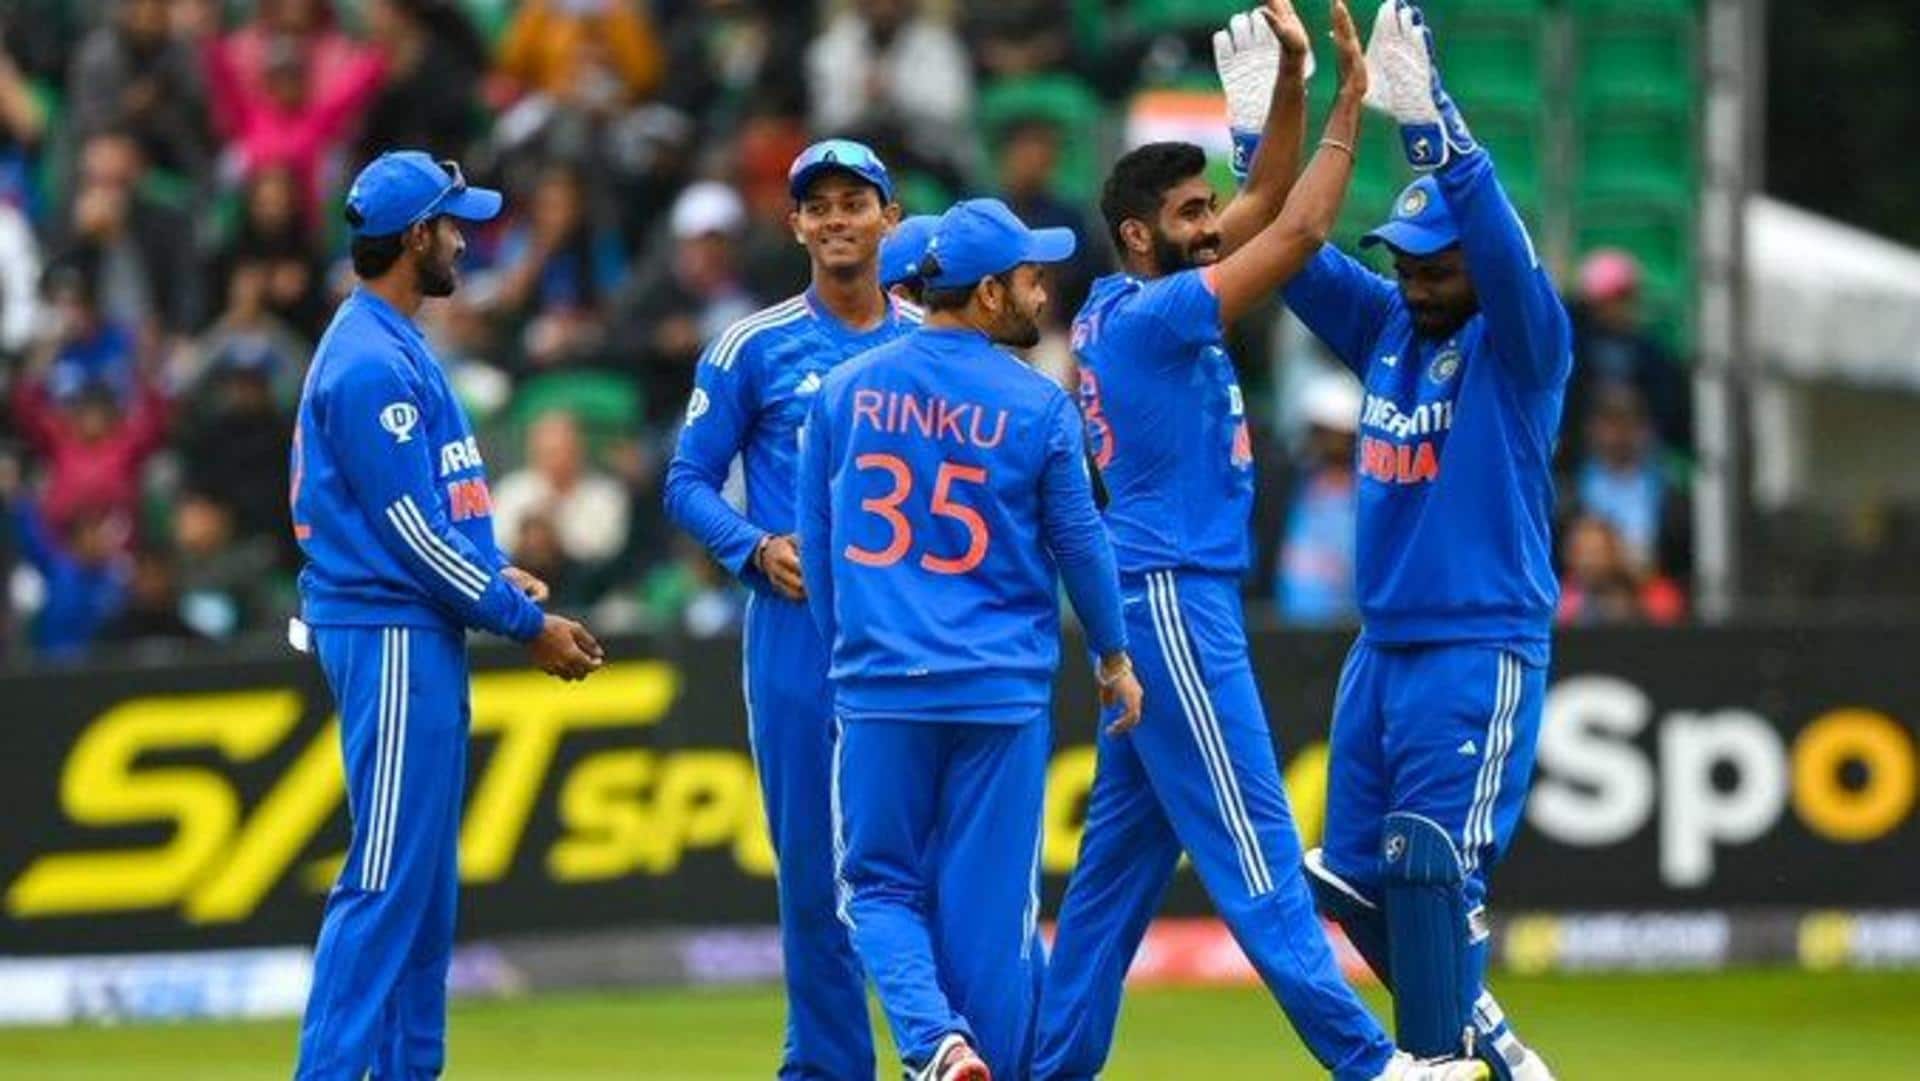 IRE vs IND, 2nd T20I: The Village pitch report